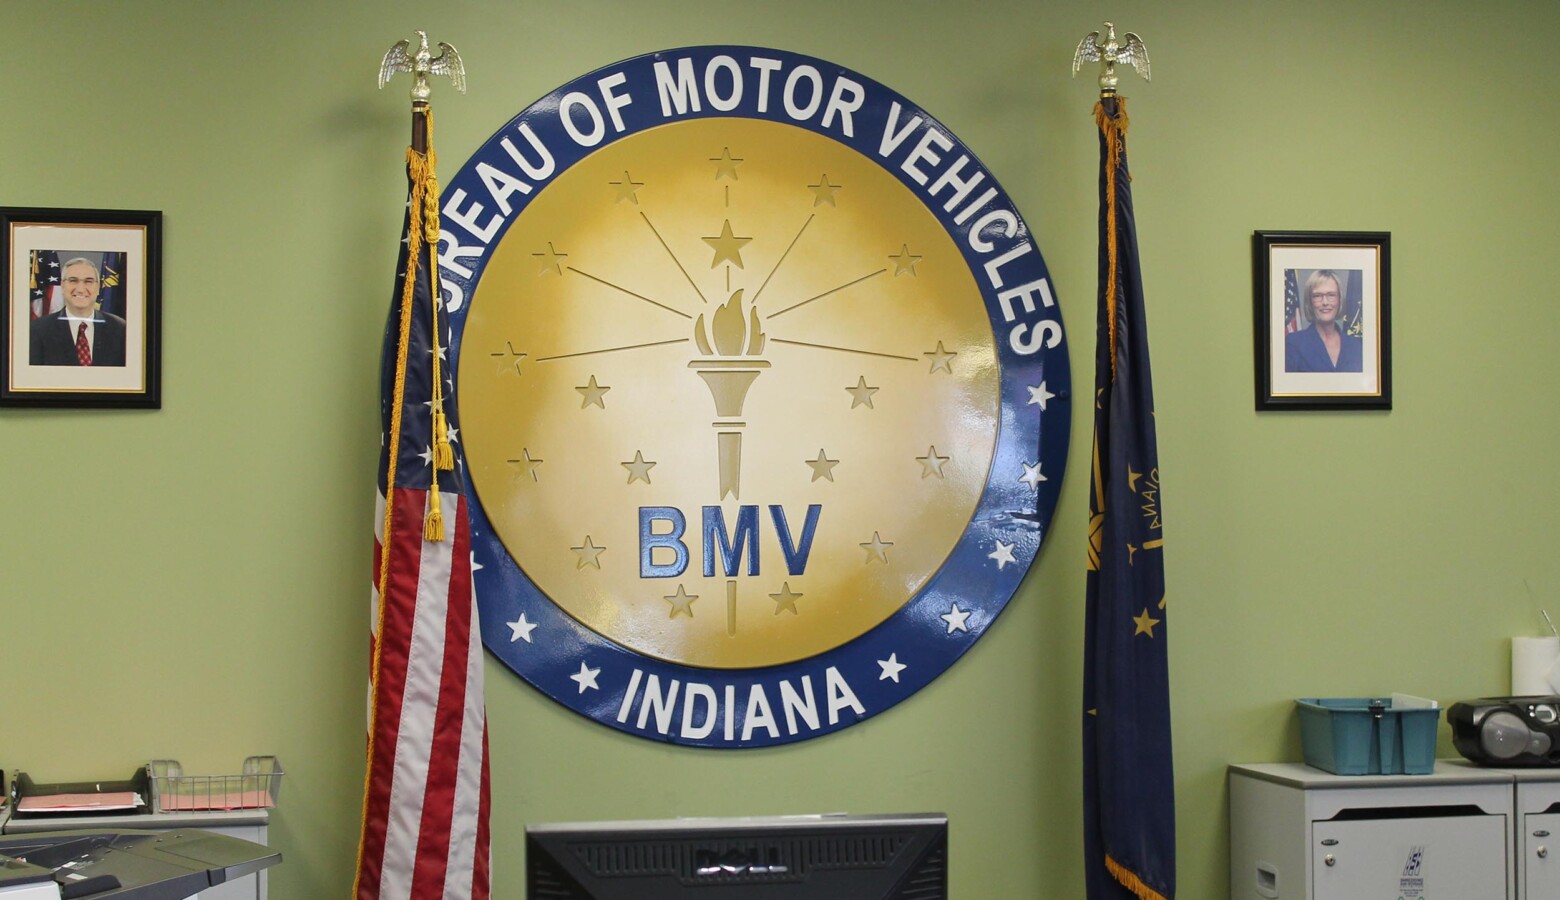 Bureau of Motor Vehicle locations across the state are starting to reopen to more in-person customers this week, with a goal to open all branches by Memorial Day. (Lauren Chapman/IPB News)